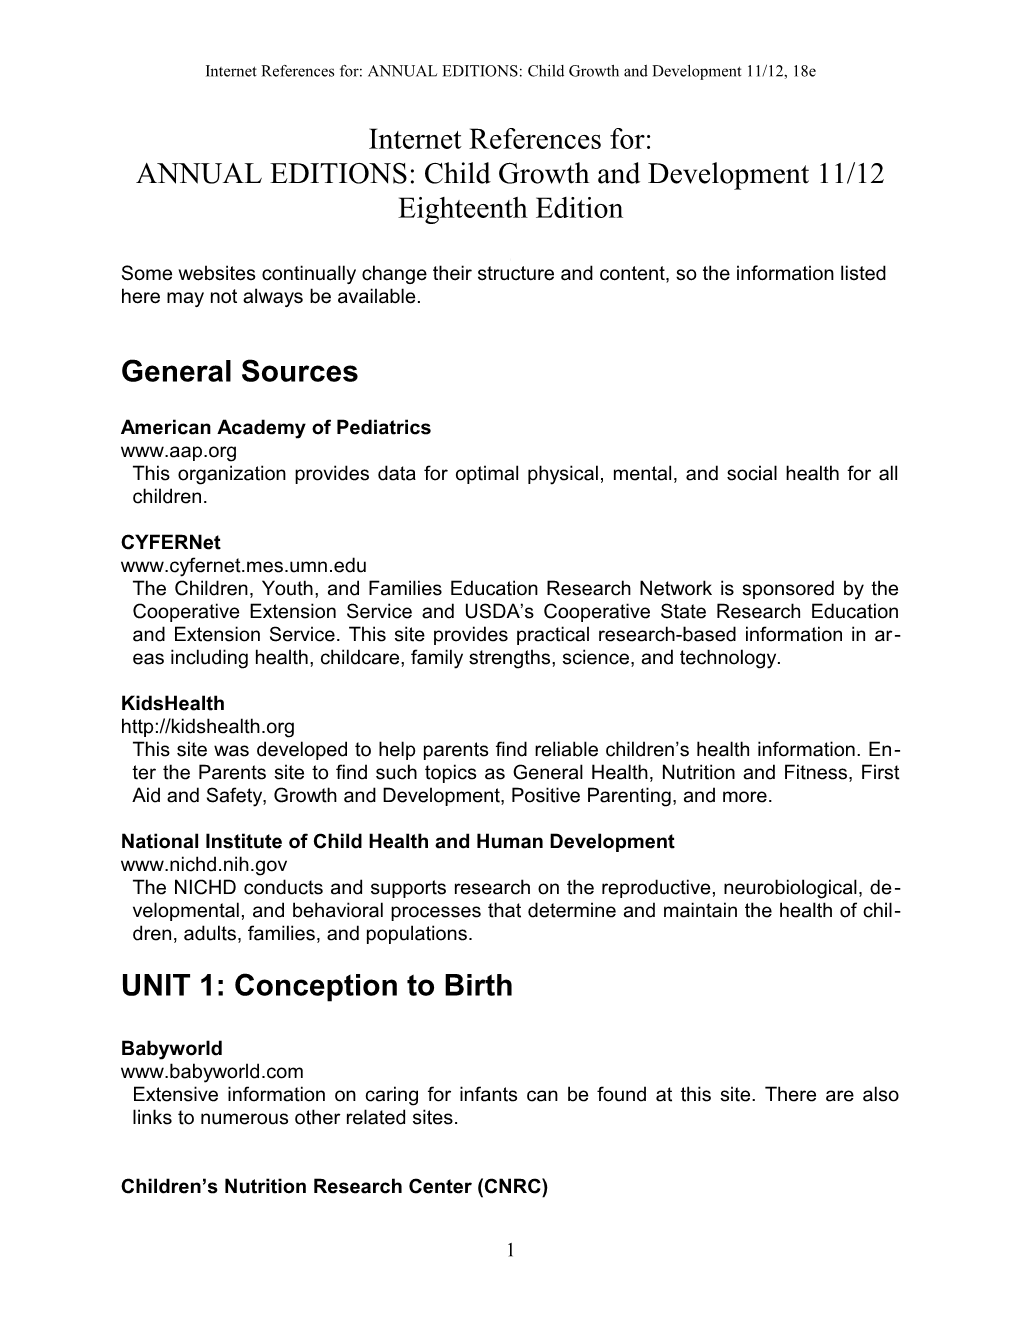 Internet References For:ANNUAL EDITIONS: Child Growth and Development 11/12, 18E